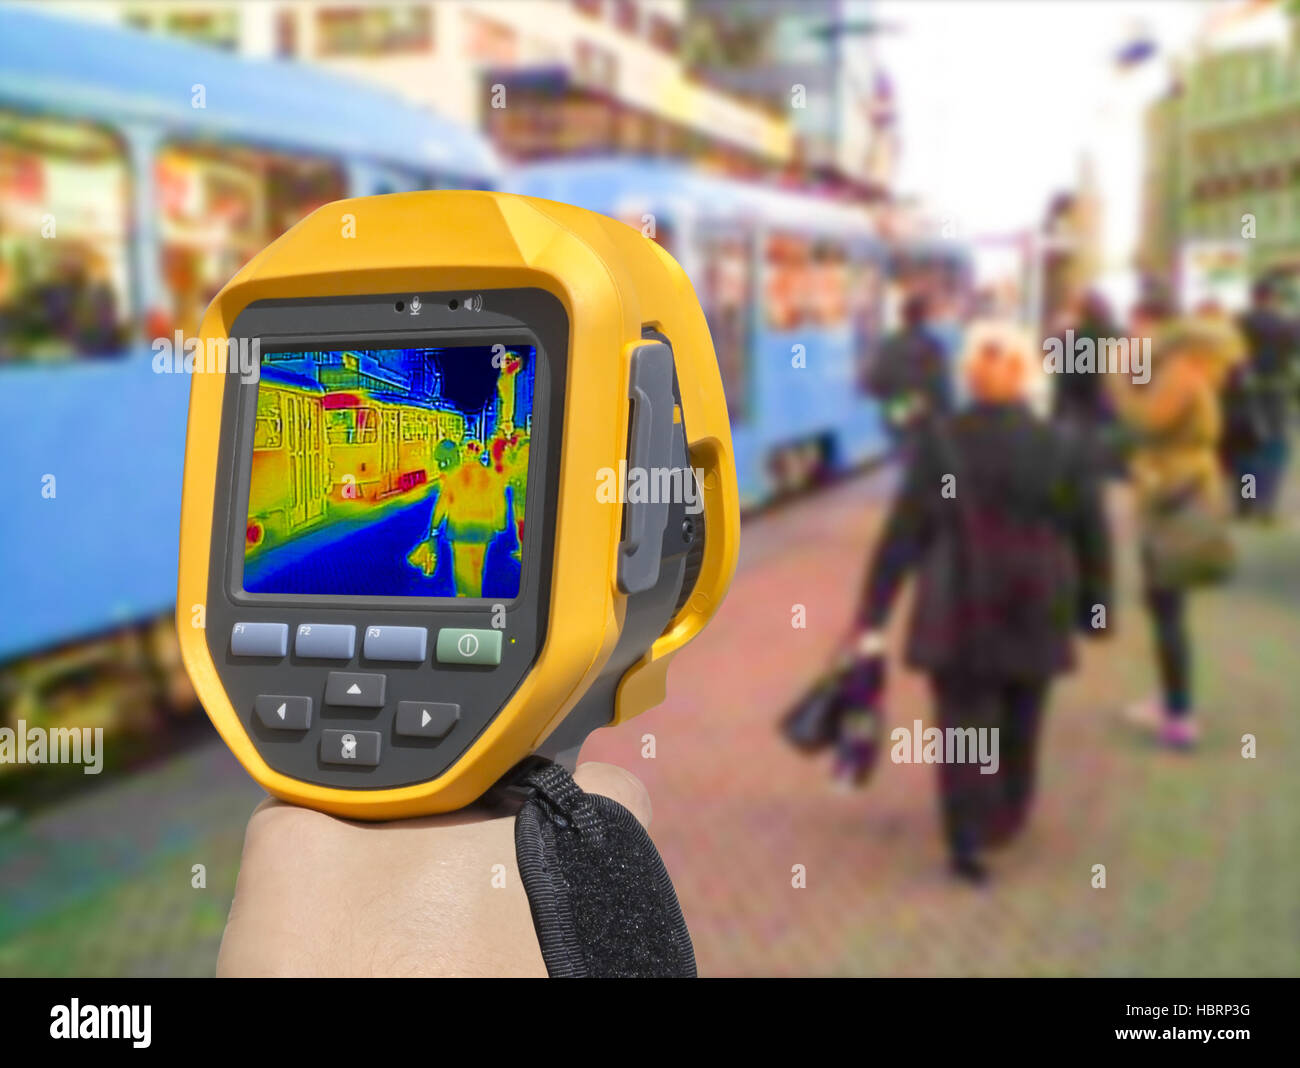 Recording with Thermal camera people at the city railway station Stock Photo